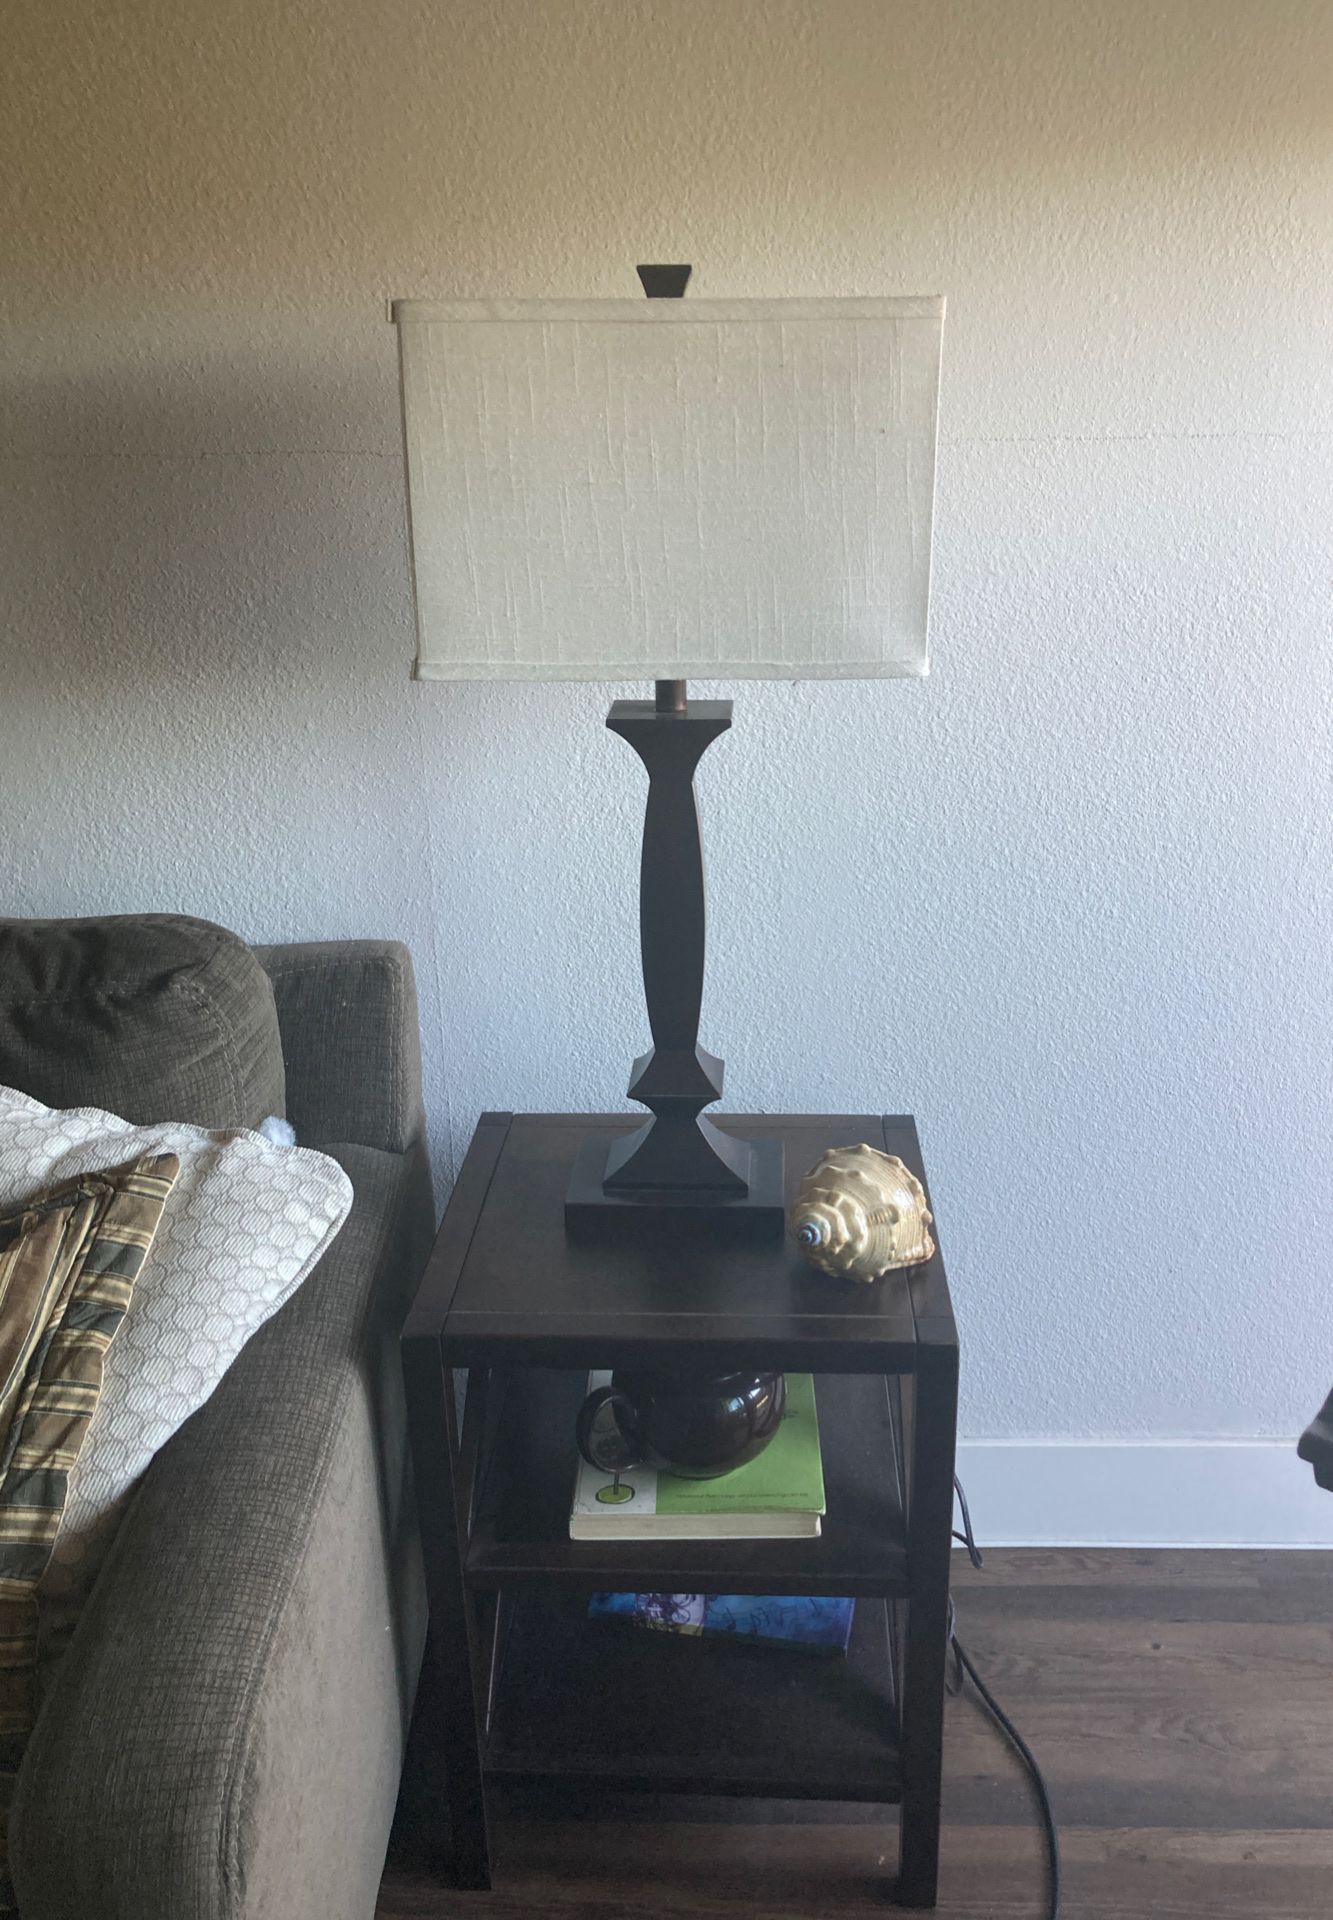 Matching end tables and lamps